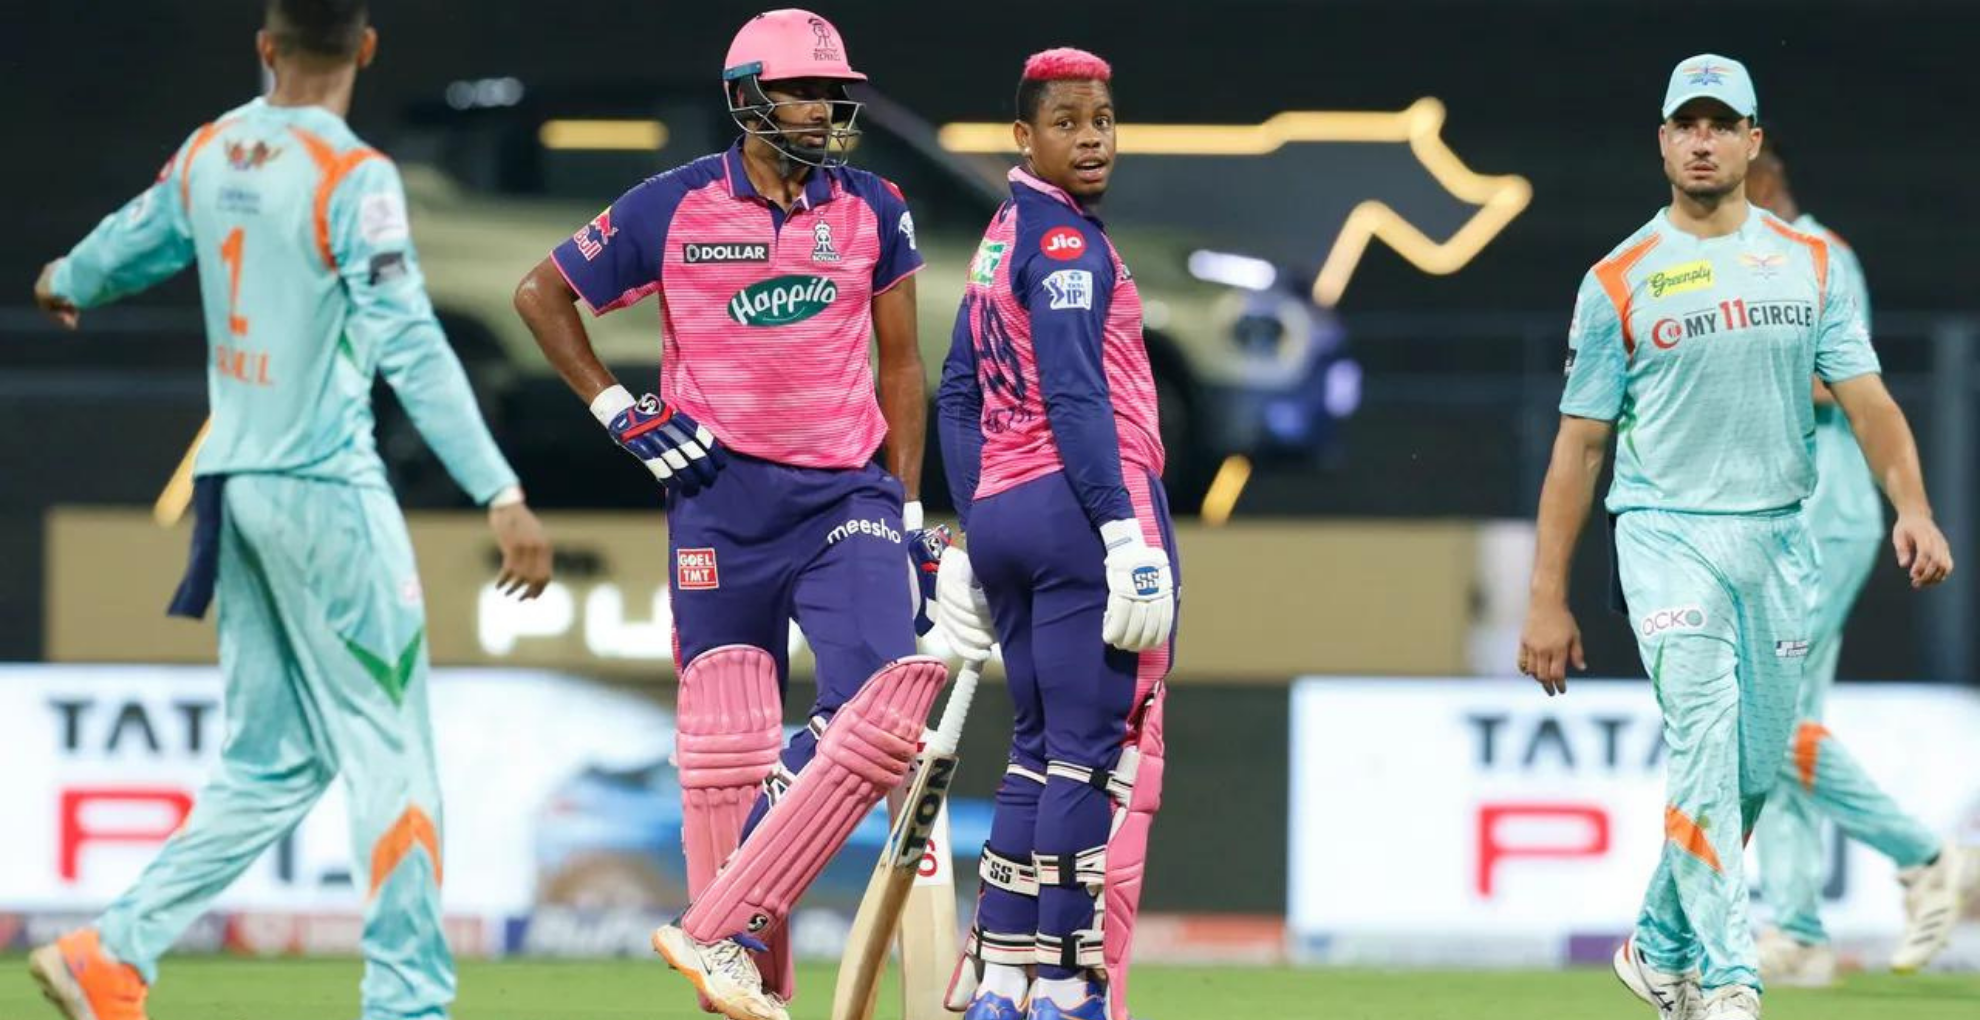 “It’s About Being Rajasthan Royals” – Sanju Samson Opens On Up Ravichandran Ashwin Getting Retired Out